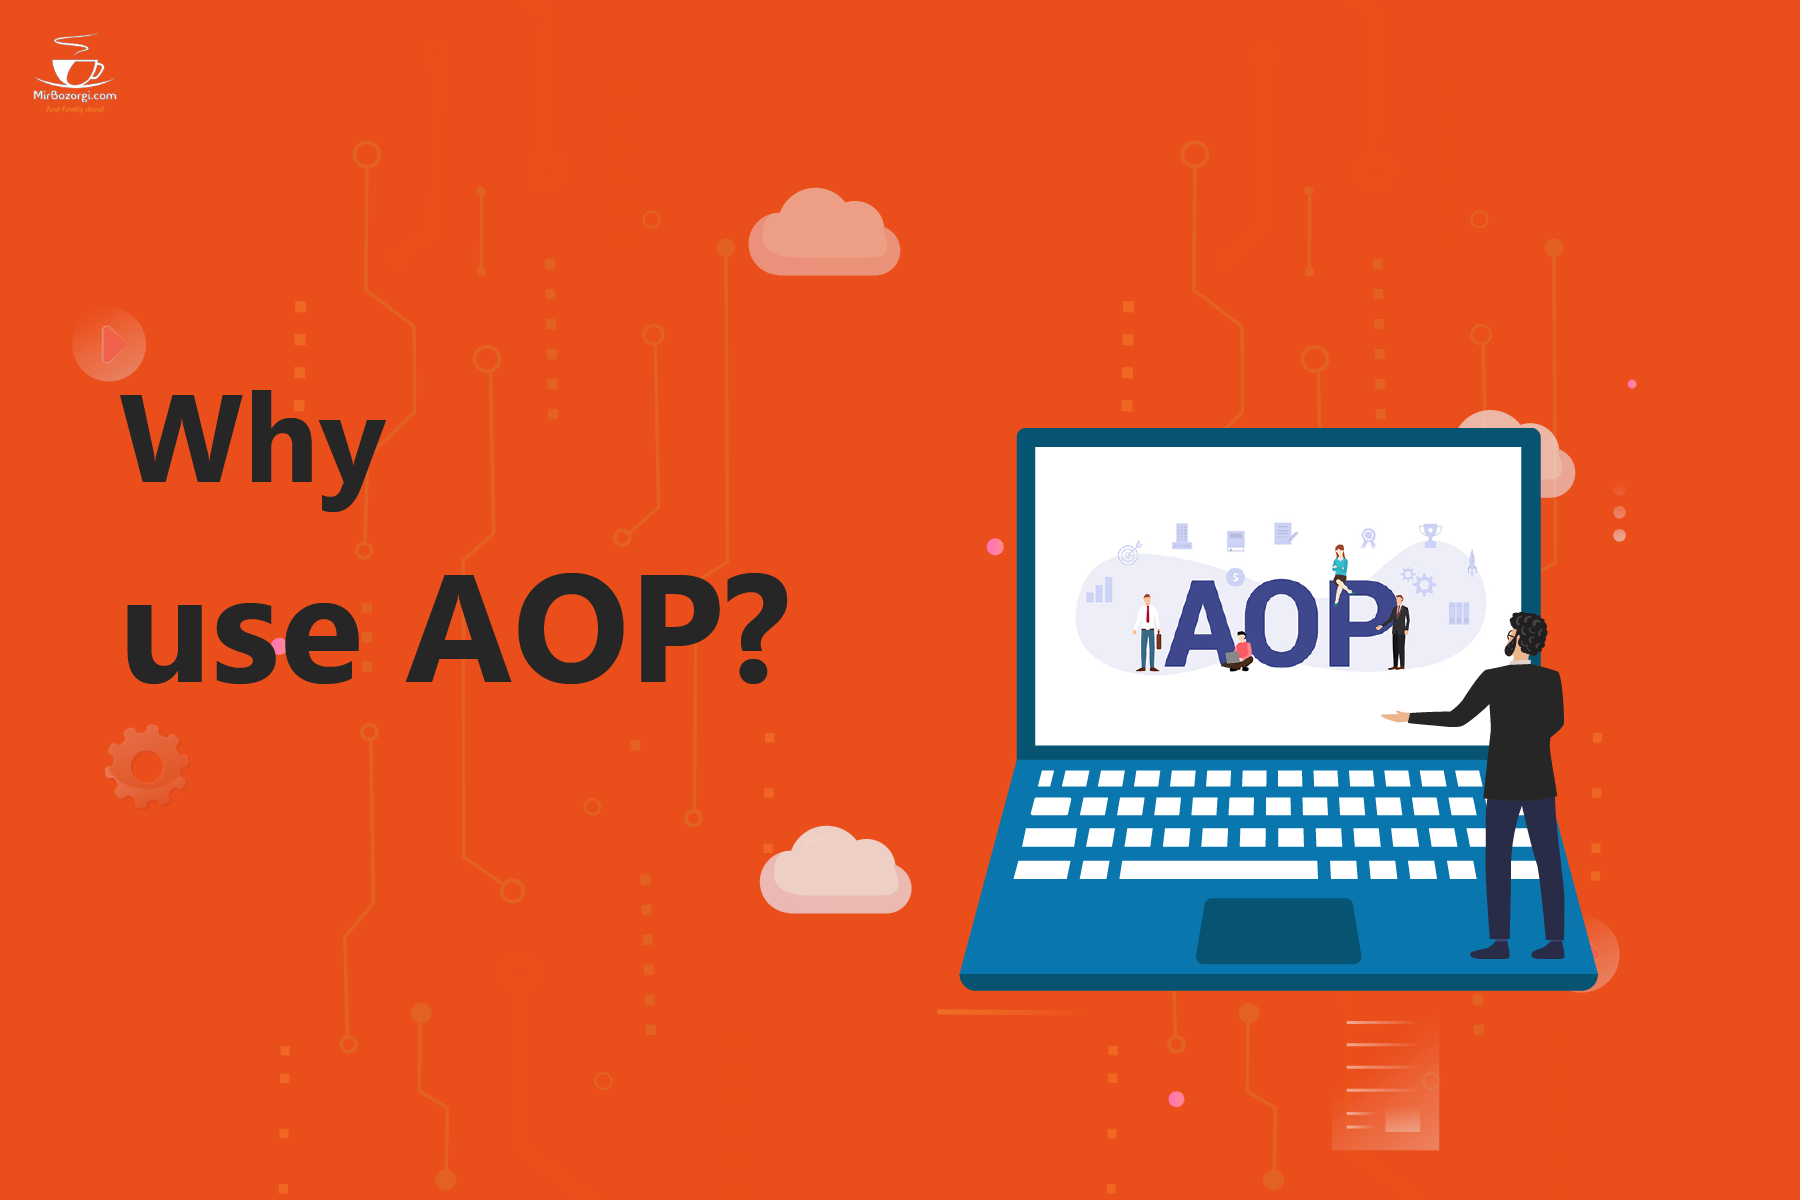 Why use AOP?